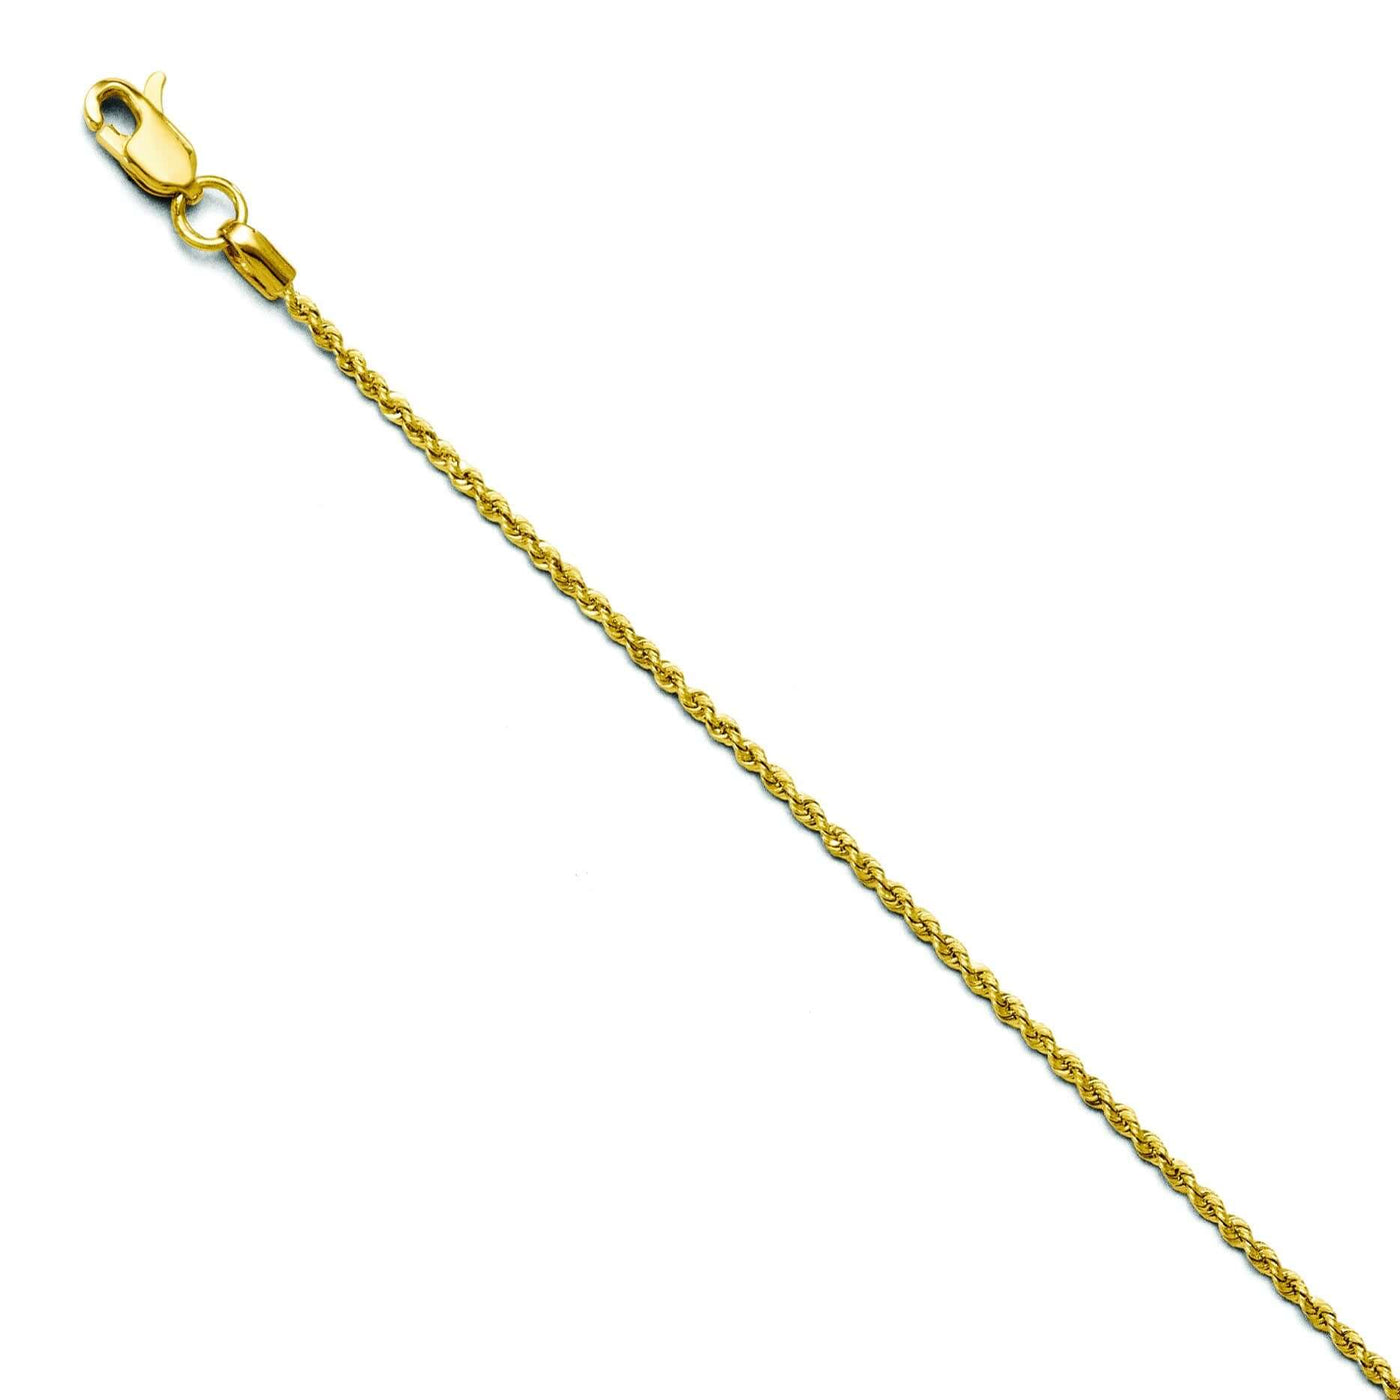 14KW 18" 1.6MM SOLID ROPE CHAIN
929-18